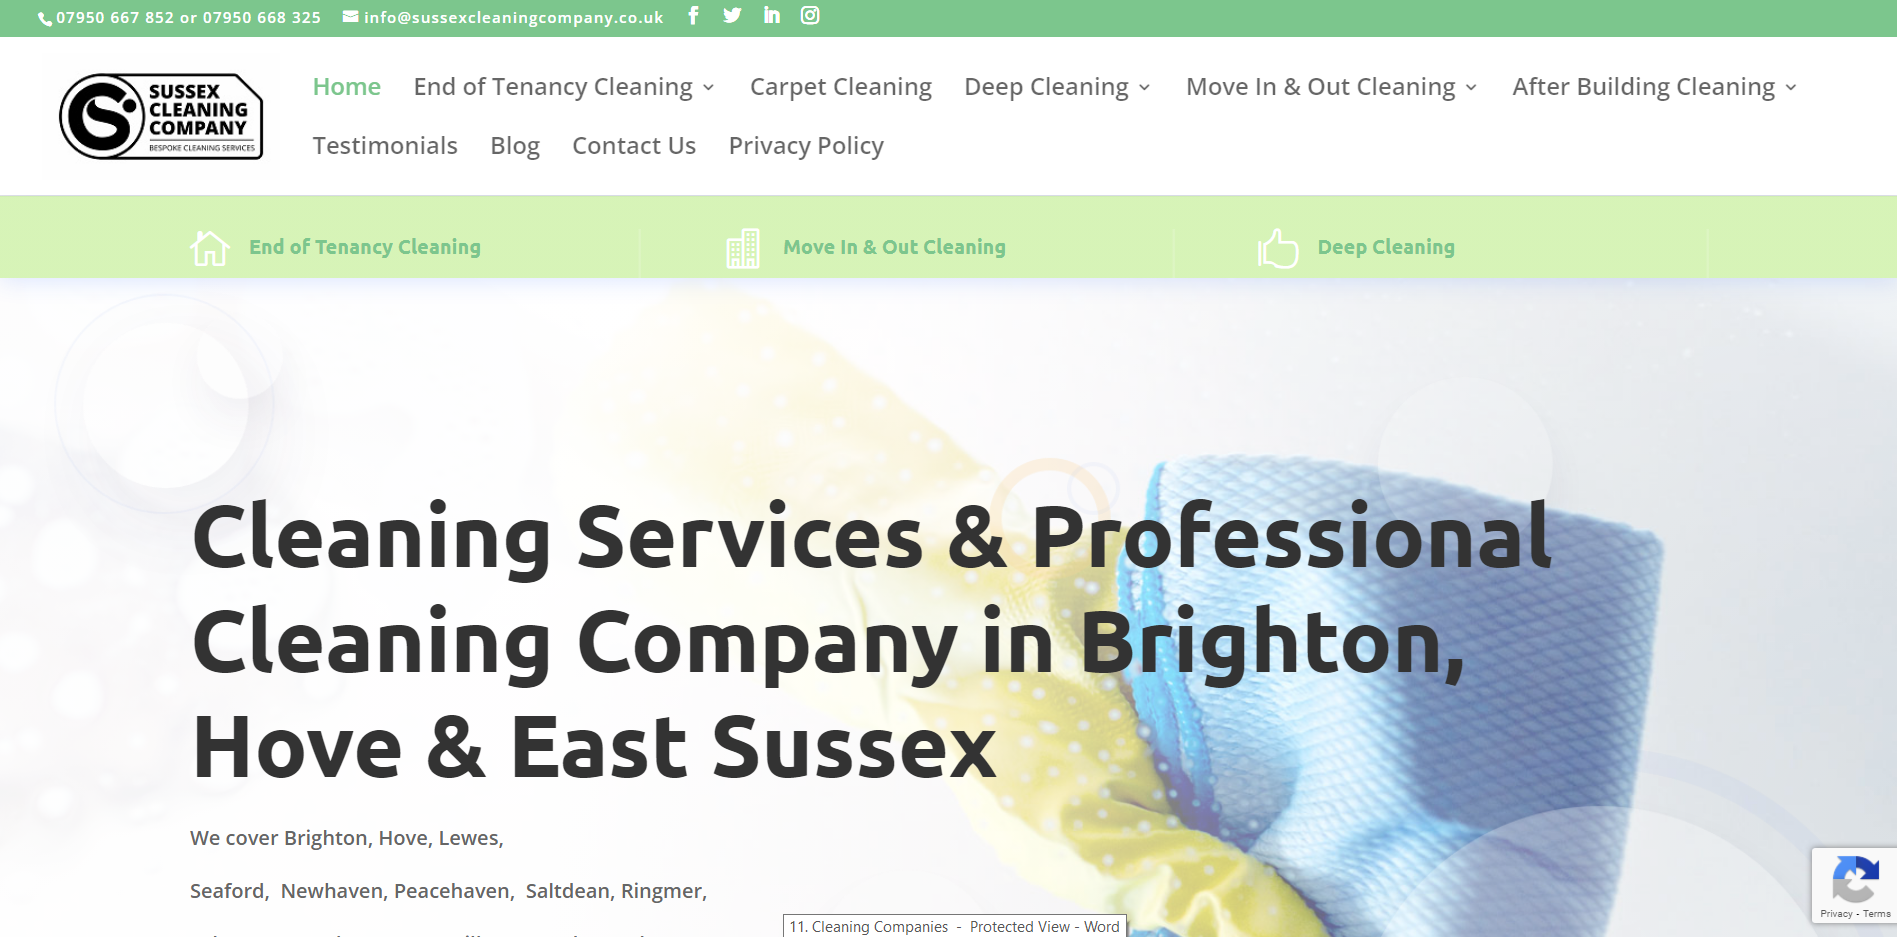 Sussex Cleaning Company